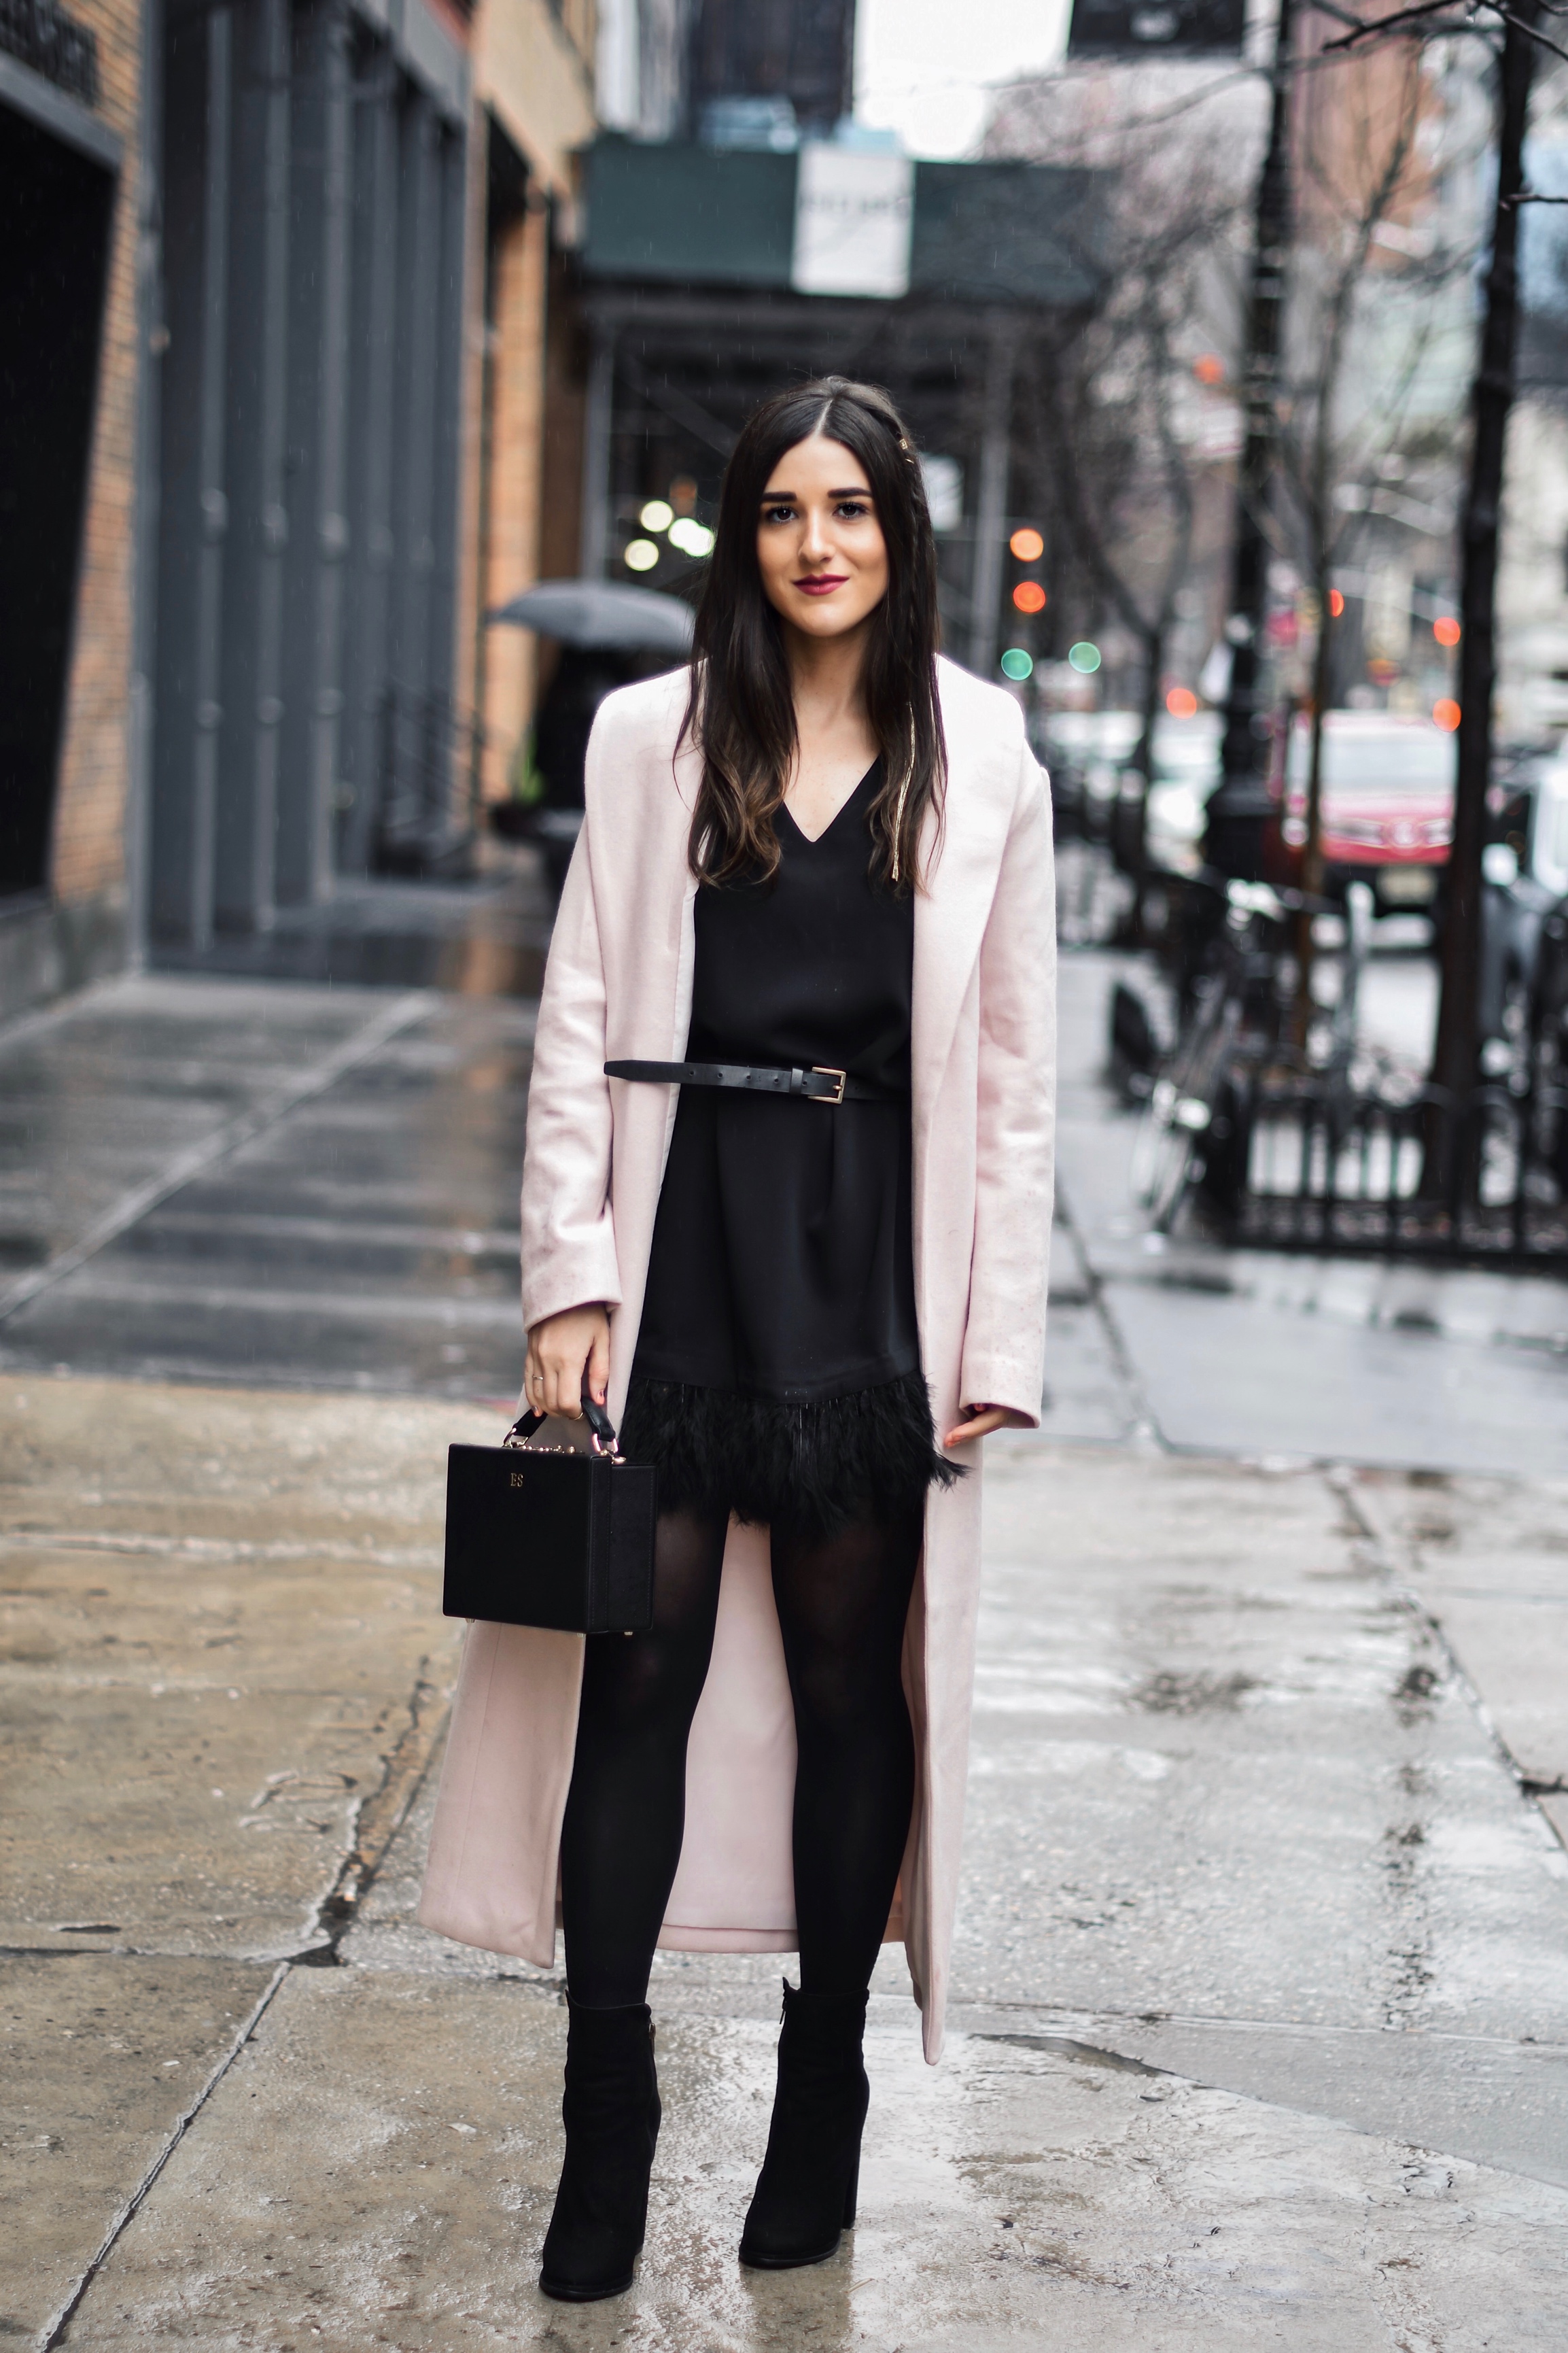 How To Stay Grounded // Black Feather Trim Dress + Long Pink Coat — Esther  Santer